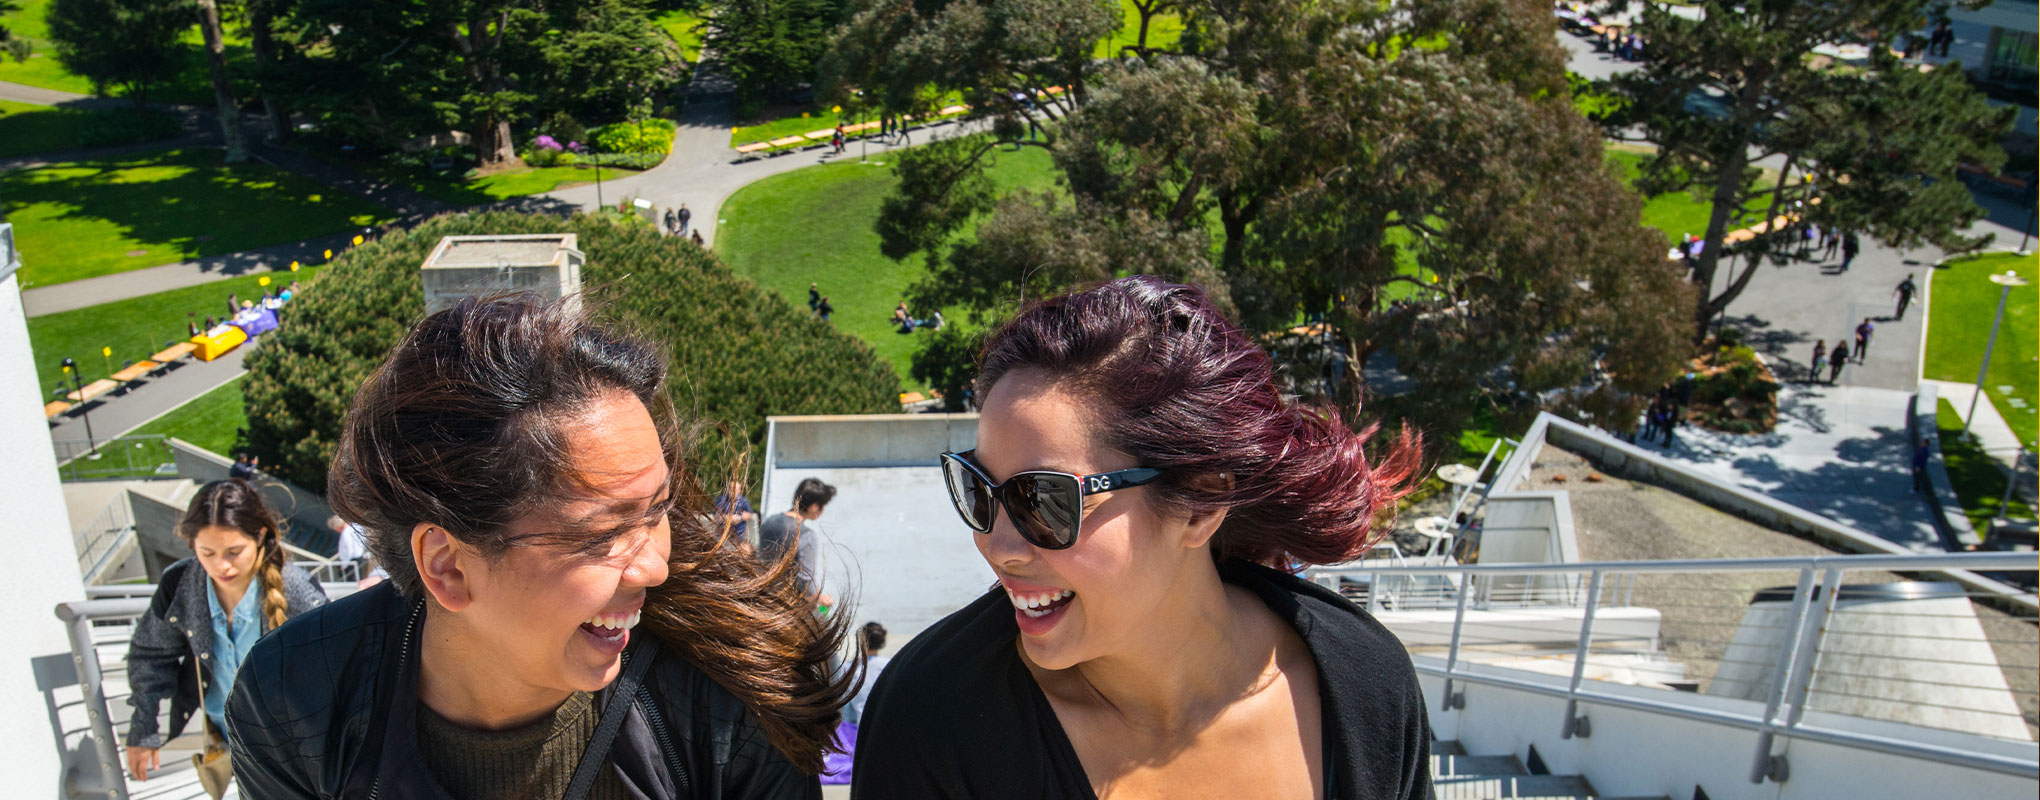 Two students laughing together on a bright windy day